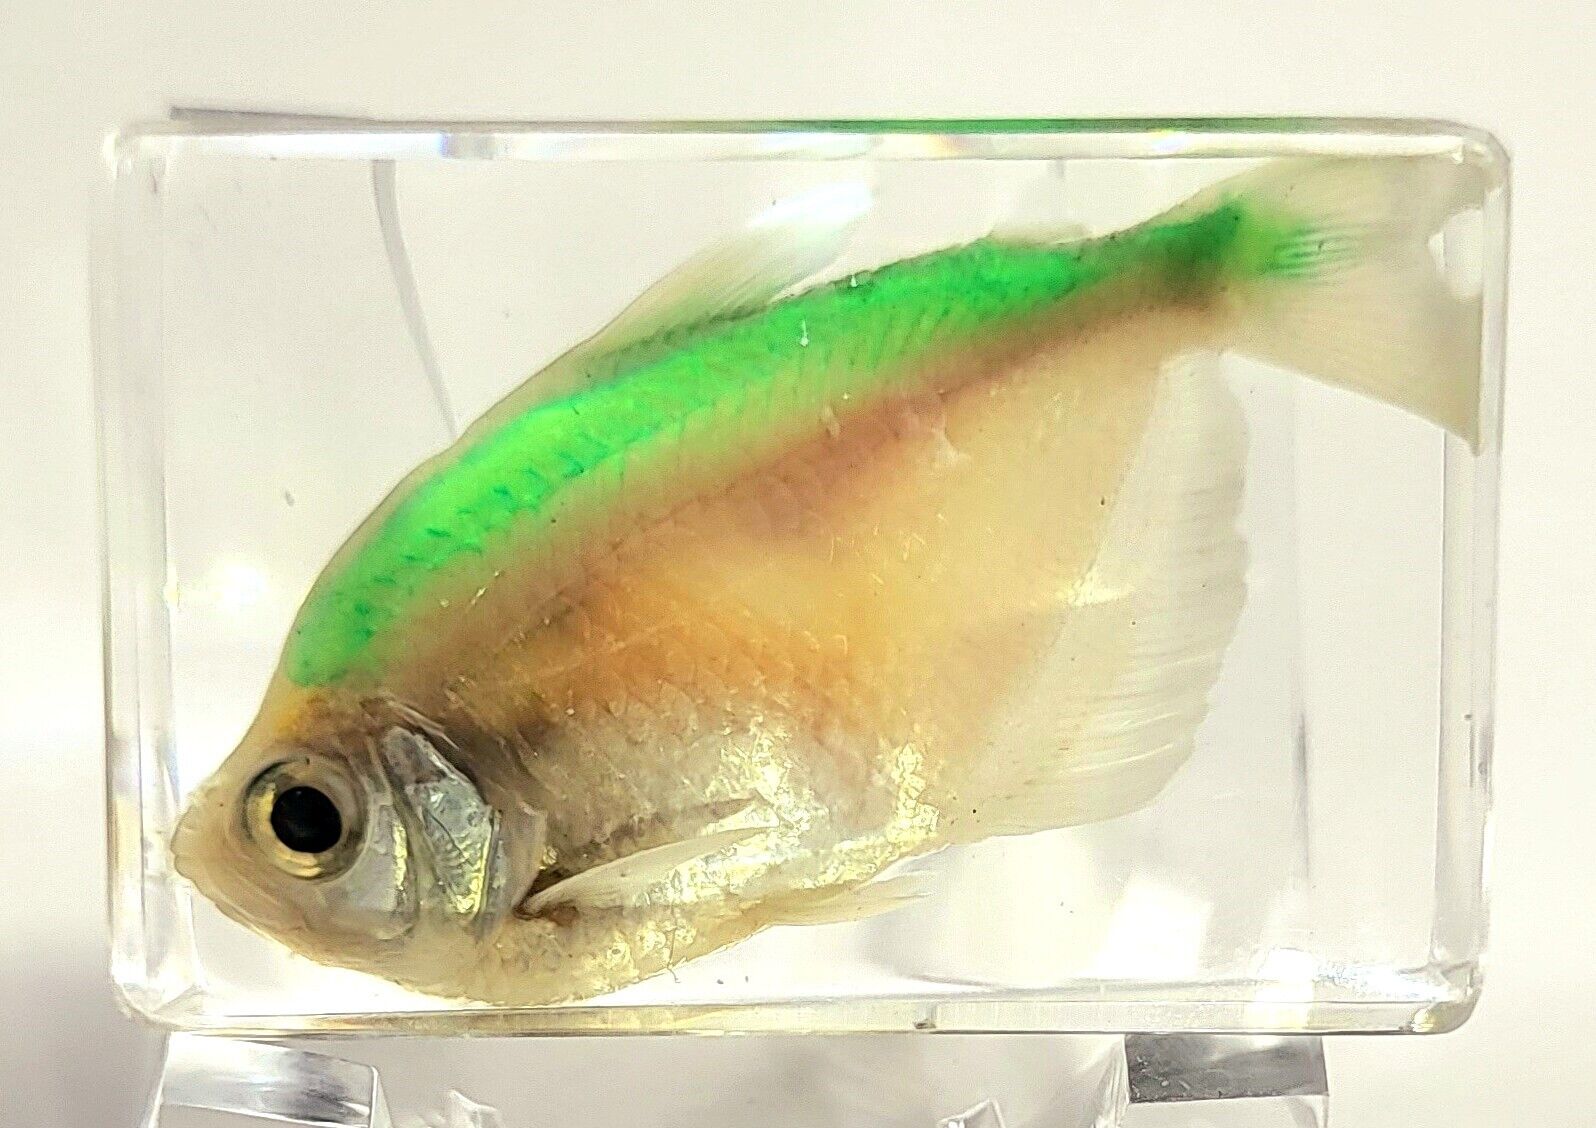 44mm Real Green Back Fish in Crystal Clear Lucite Science Education Specimen